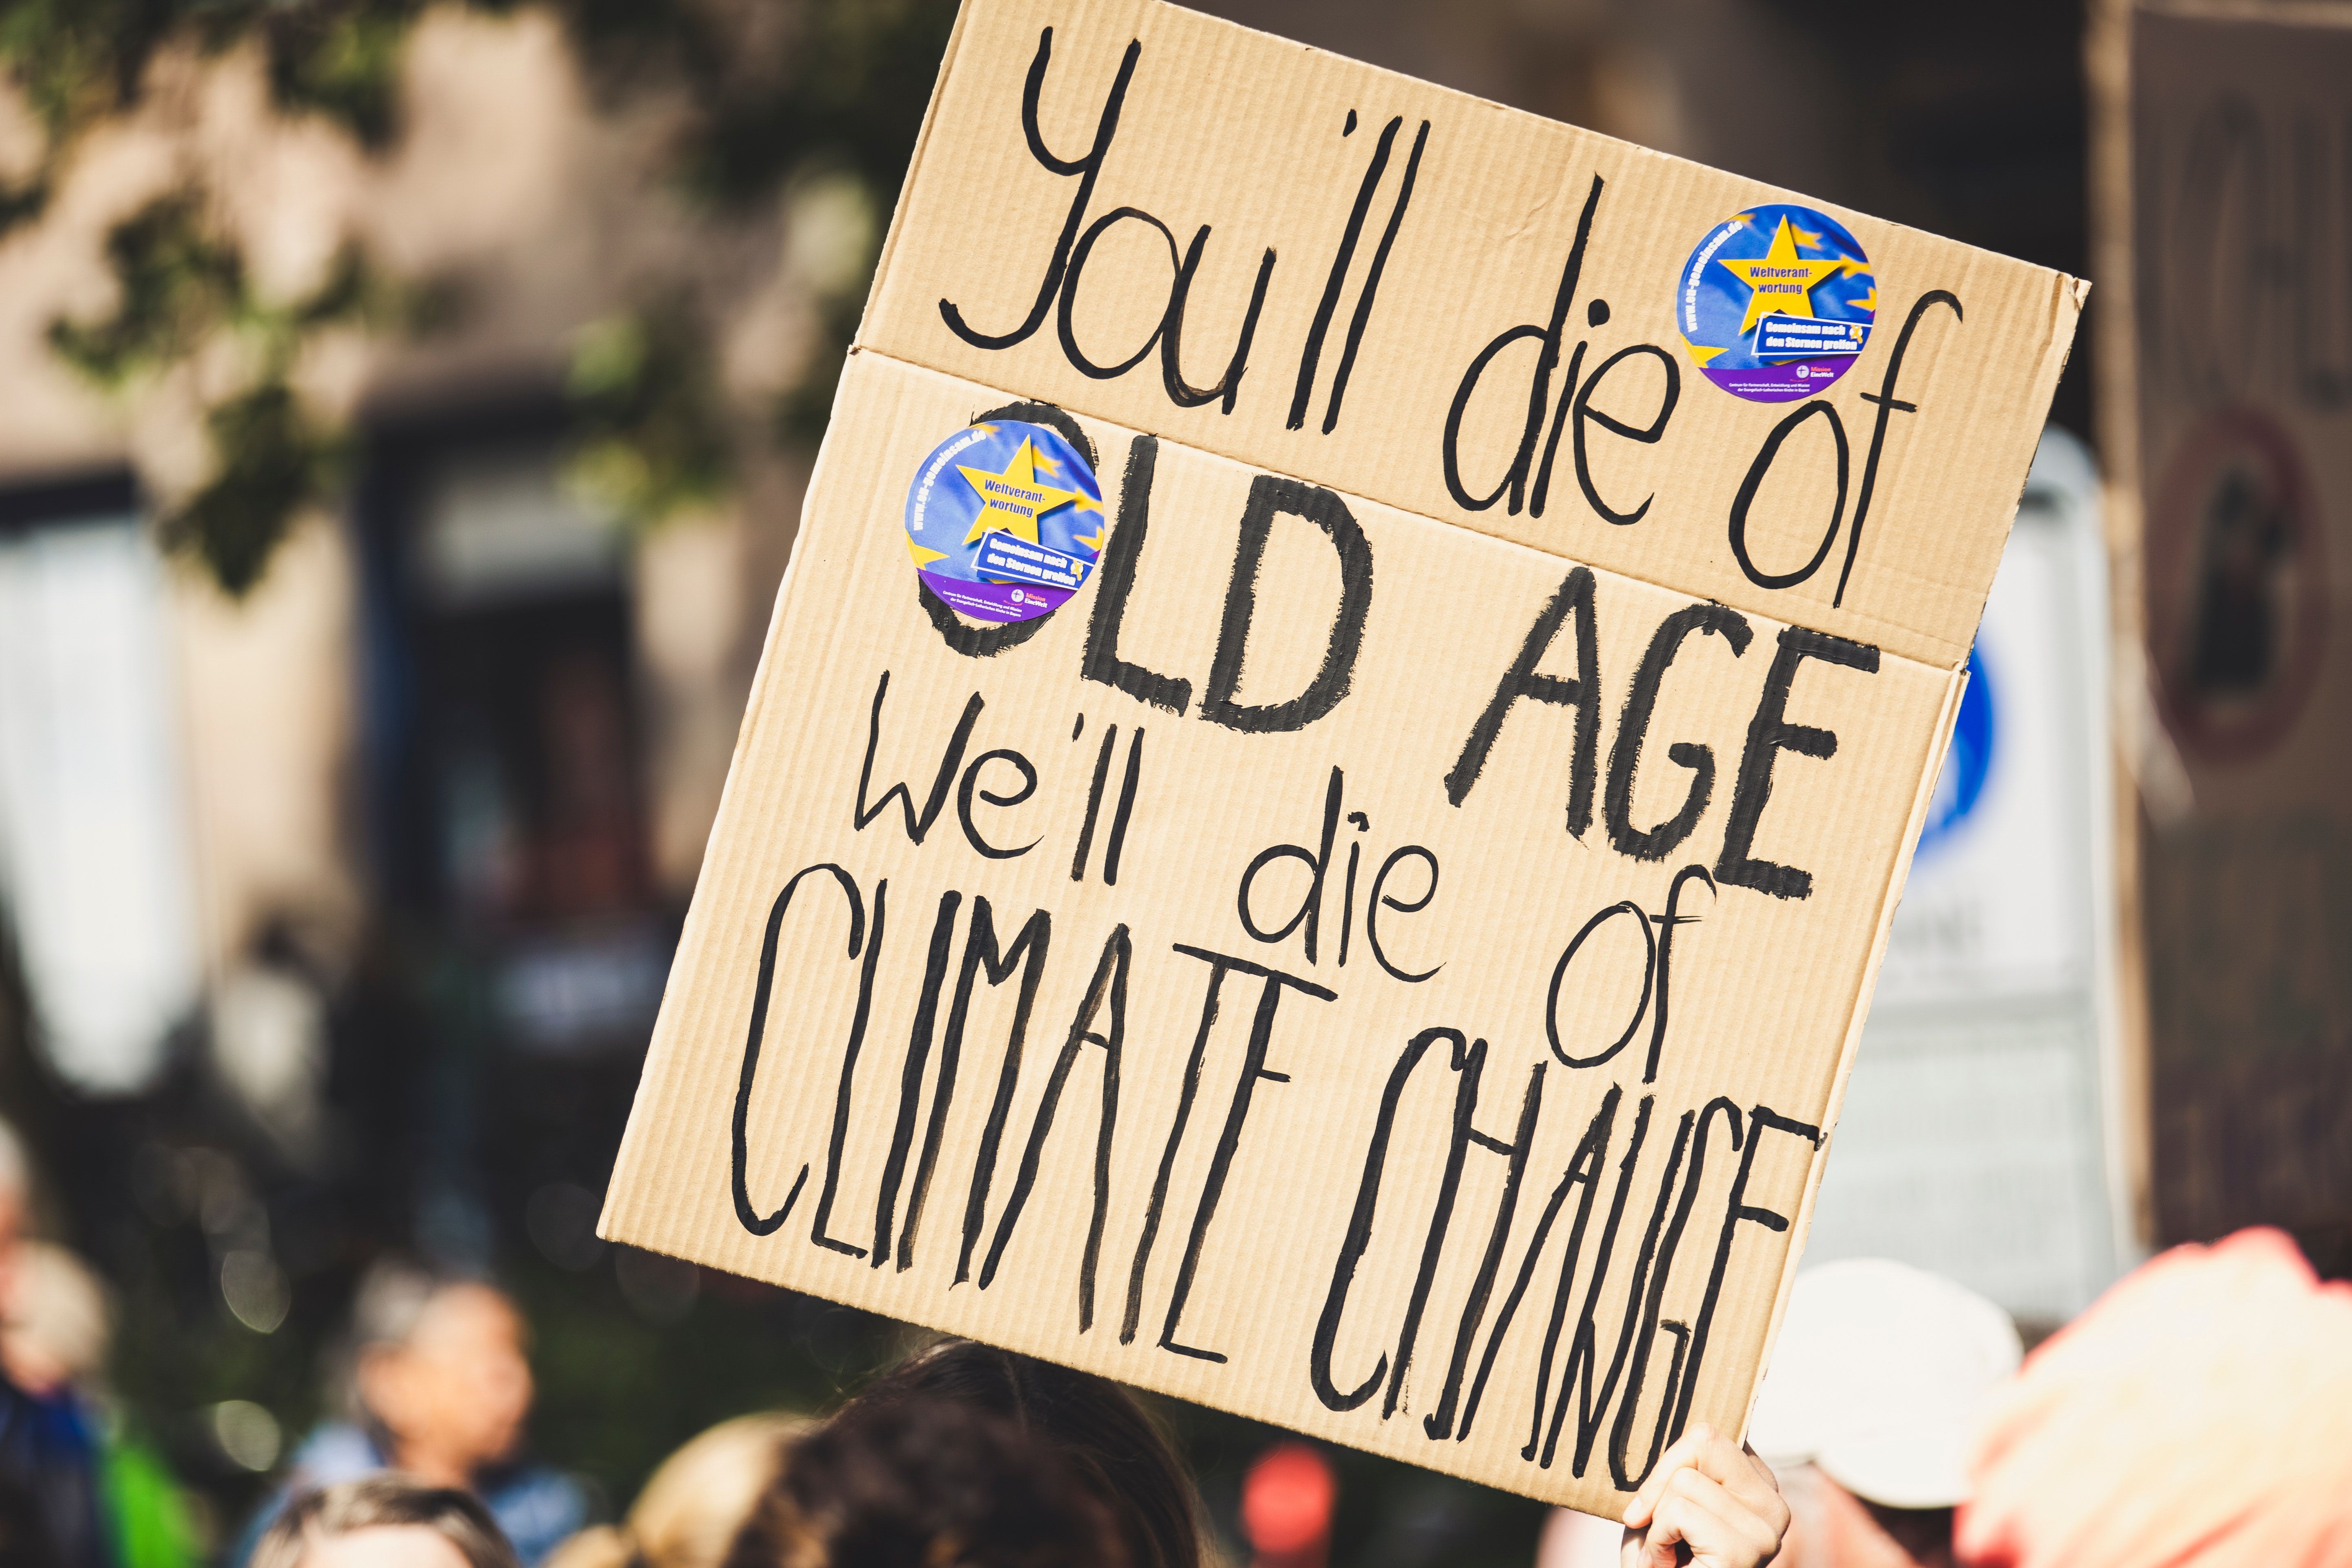 A protest sign showing the words "you'll die of old age, we'll die of climate change"